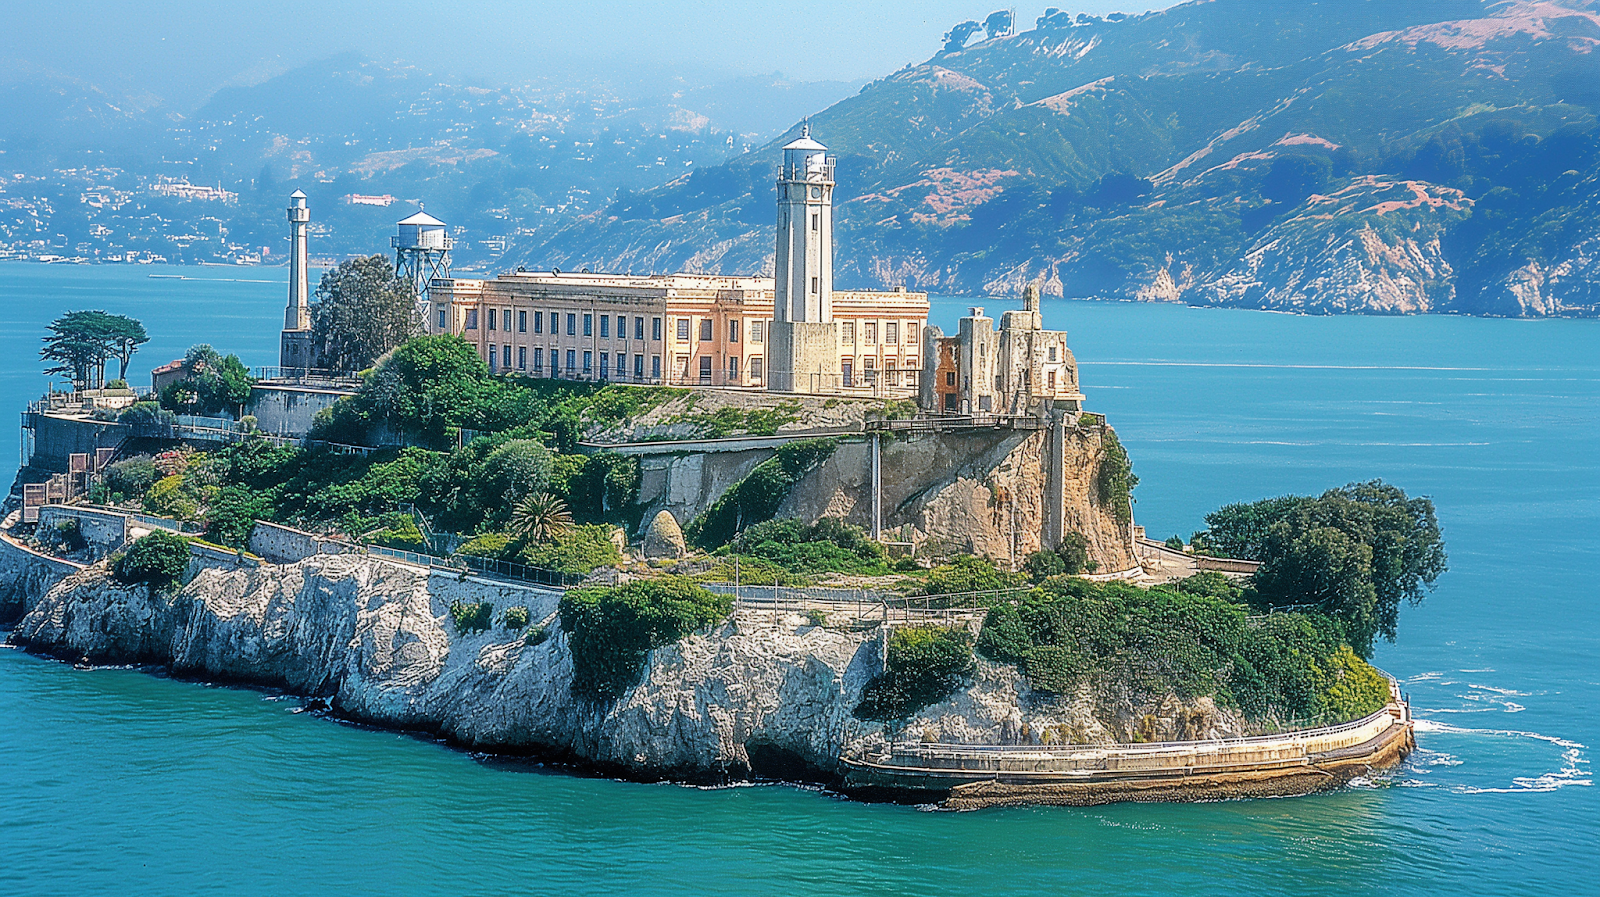 The historic Alcatraz Island, a solemn reminder of San Francisco’s past, viewed from the bay.